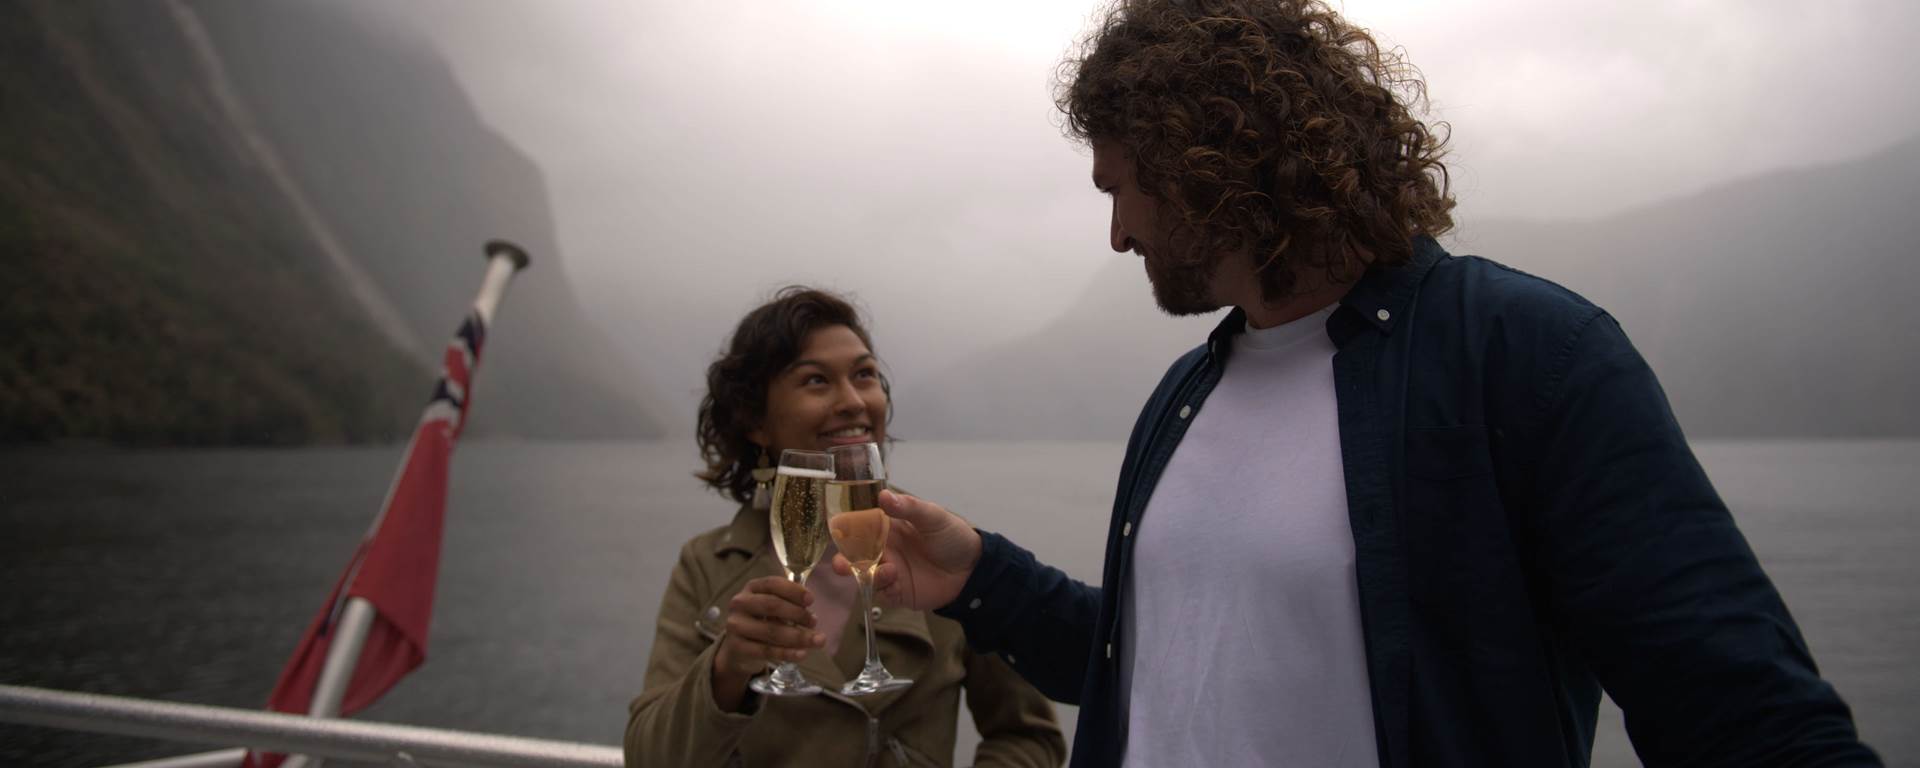 A couple clinking champagne glasses on Milford Sound